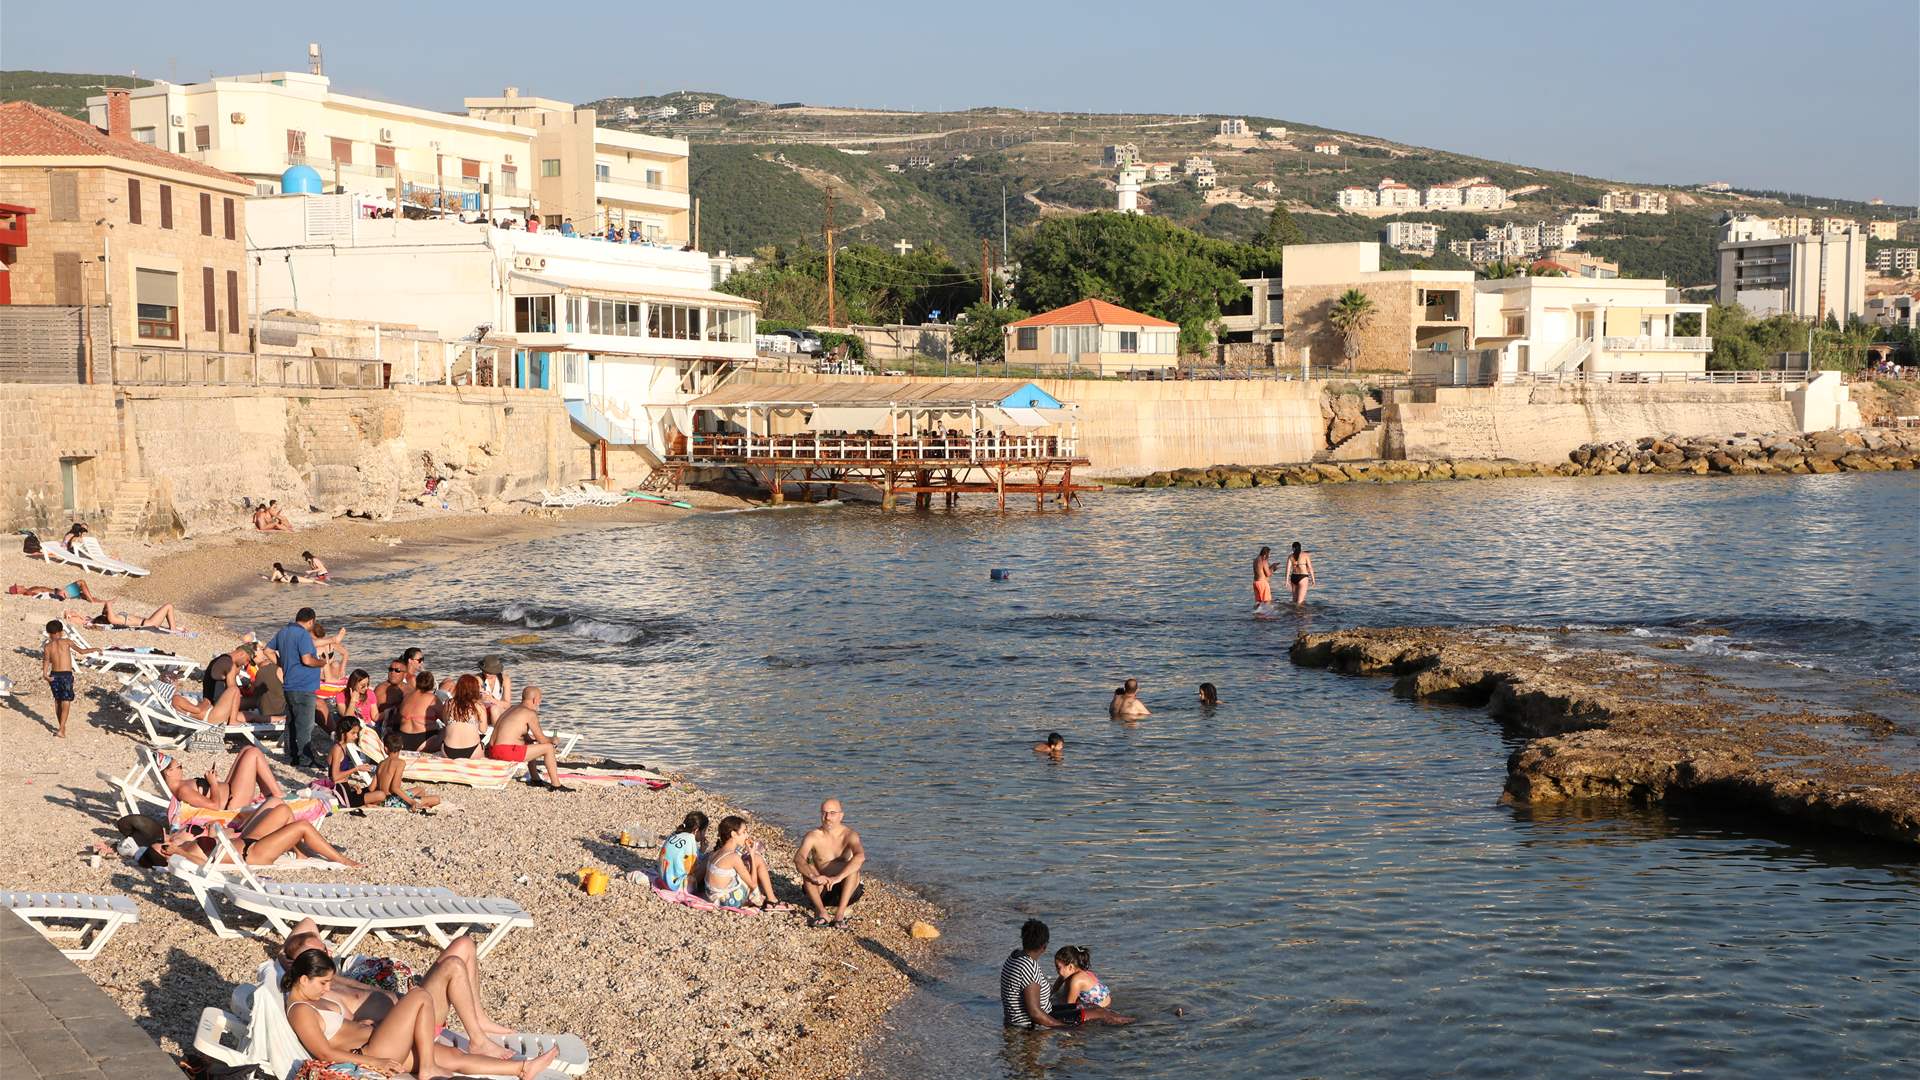 Arab countries lead the way in tourism while Lebanon stalls